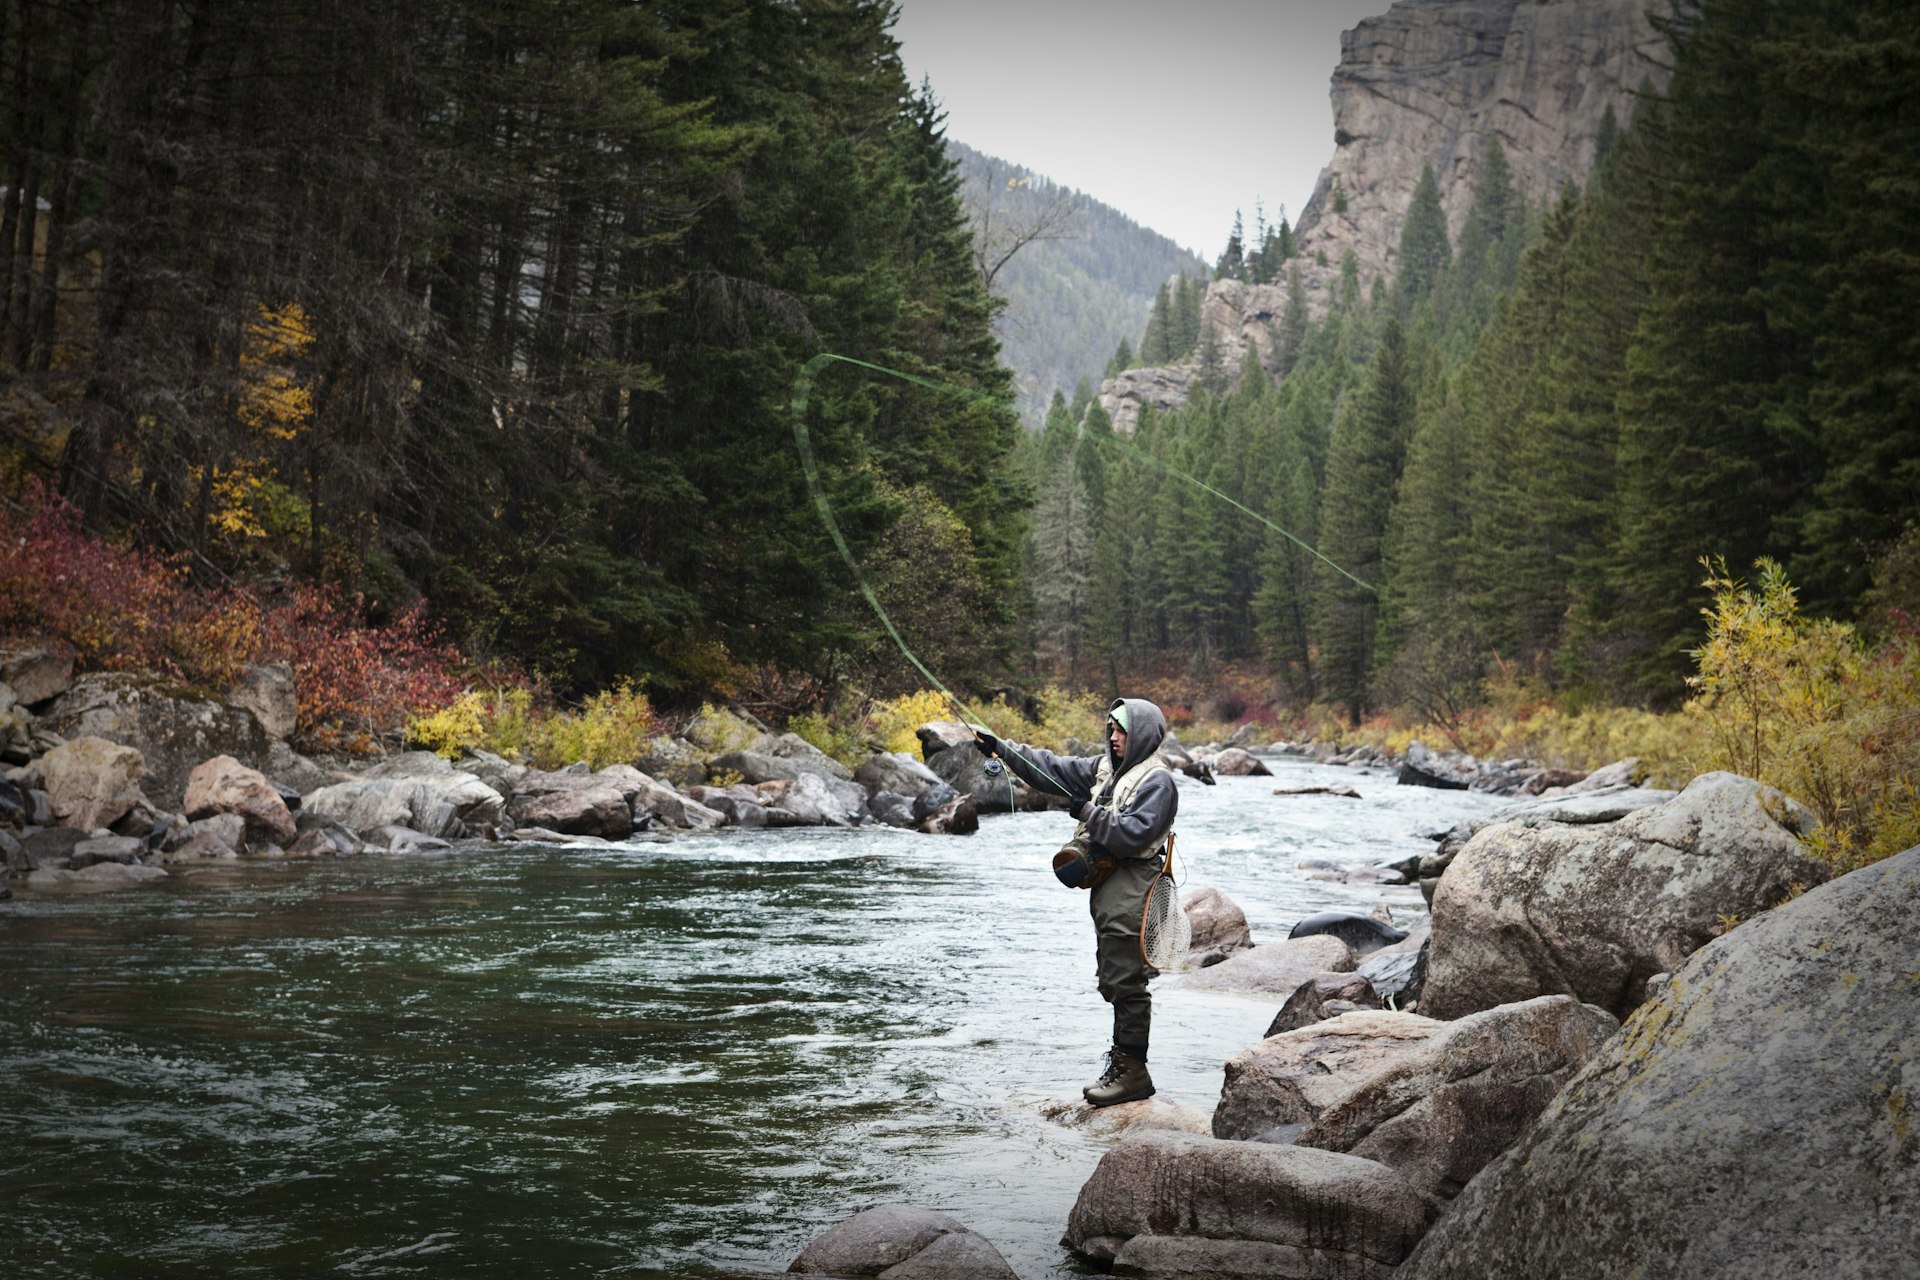 Man fly fishing on the banks of river surrounded by fall colors in Montana